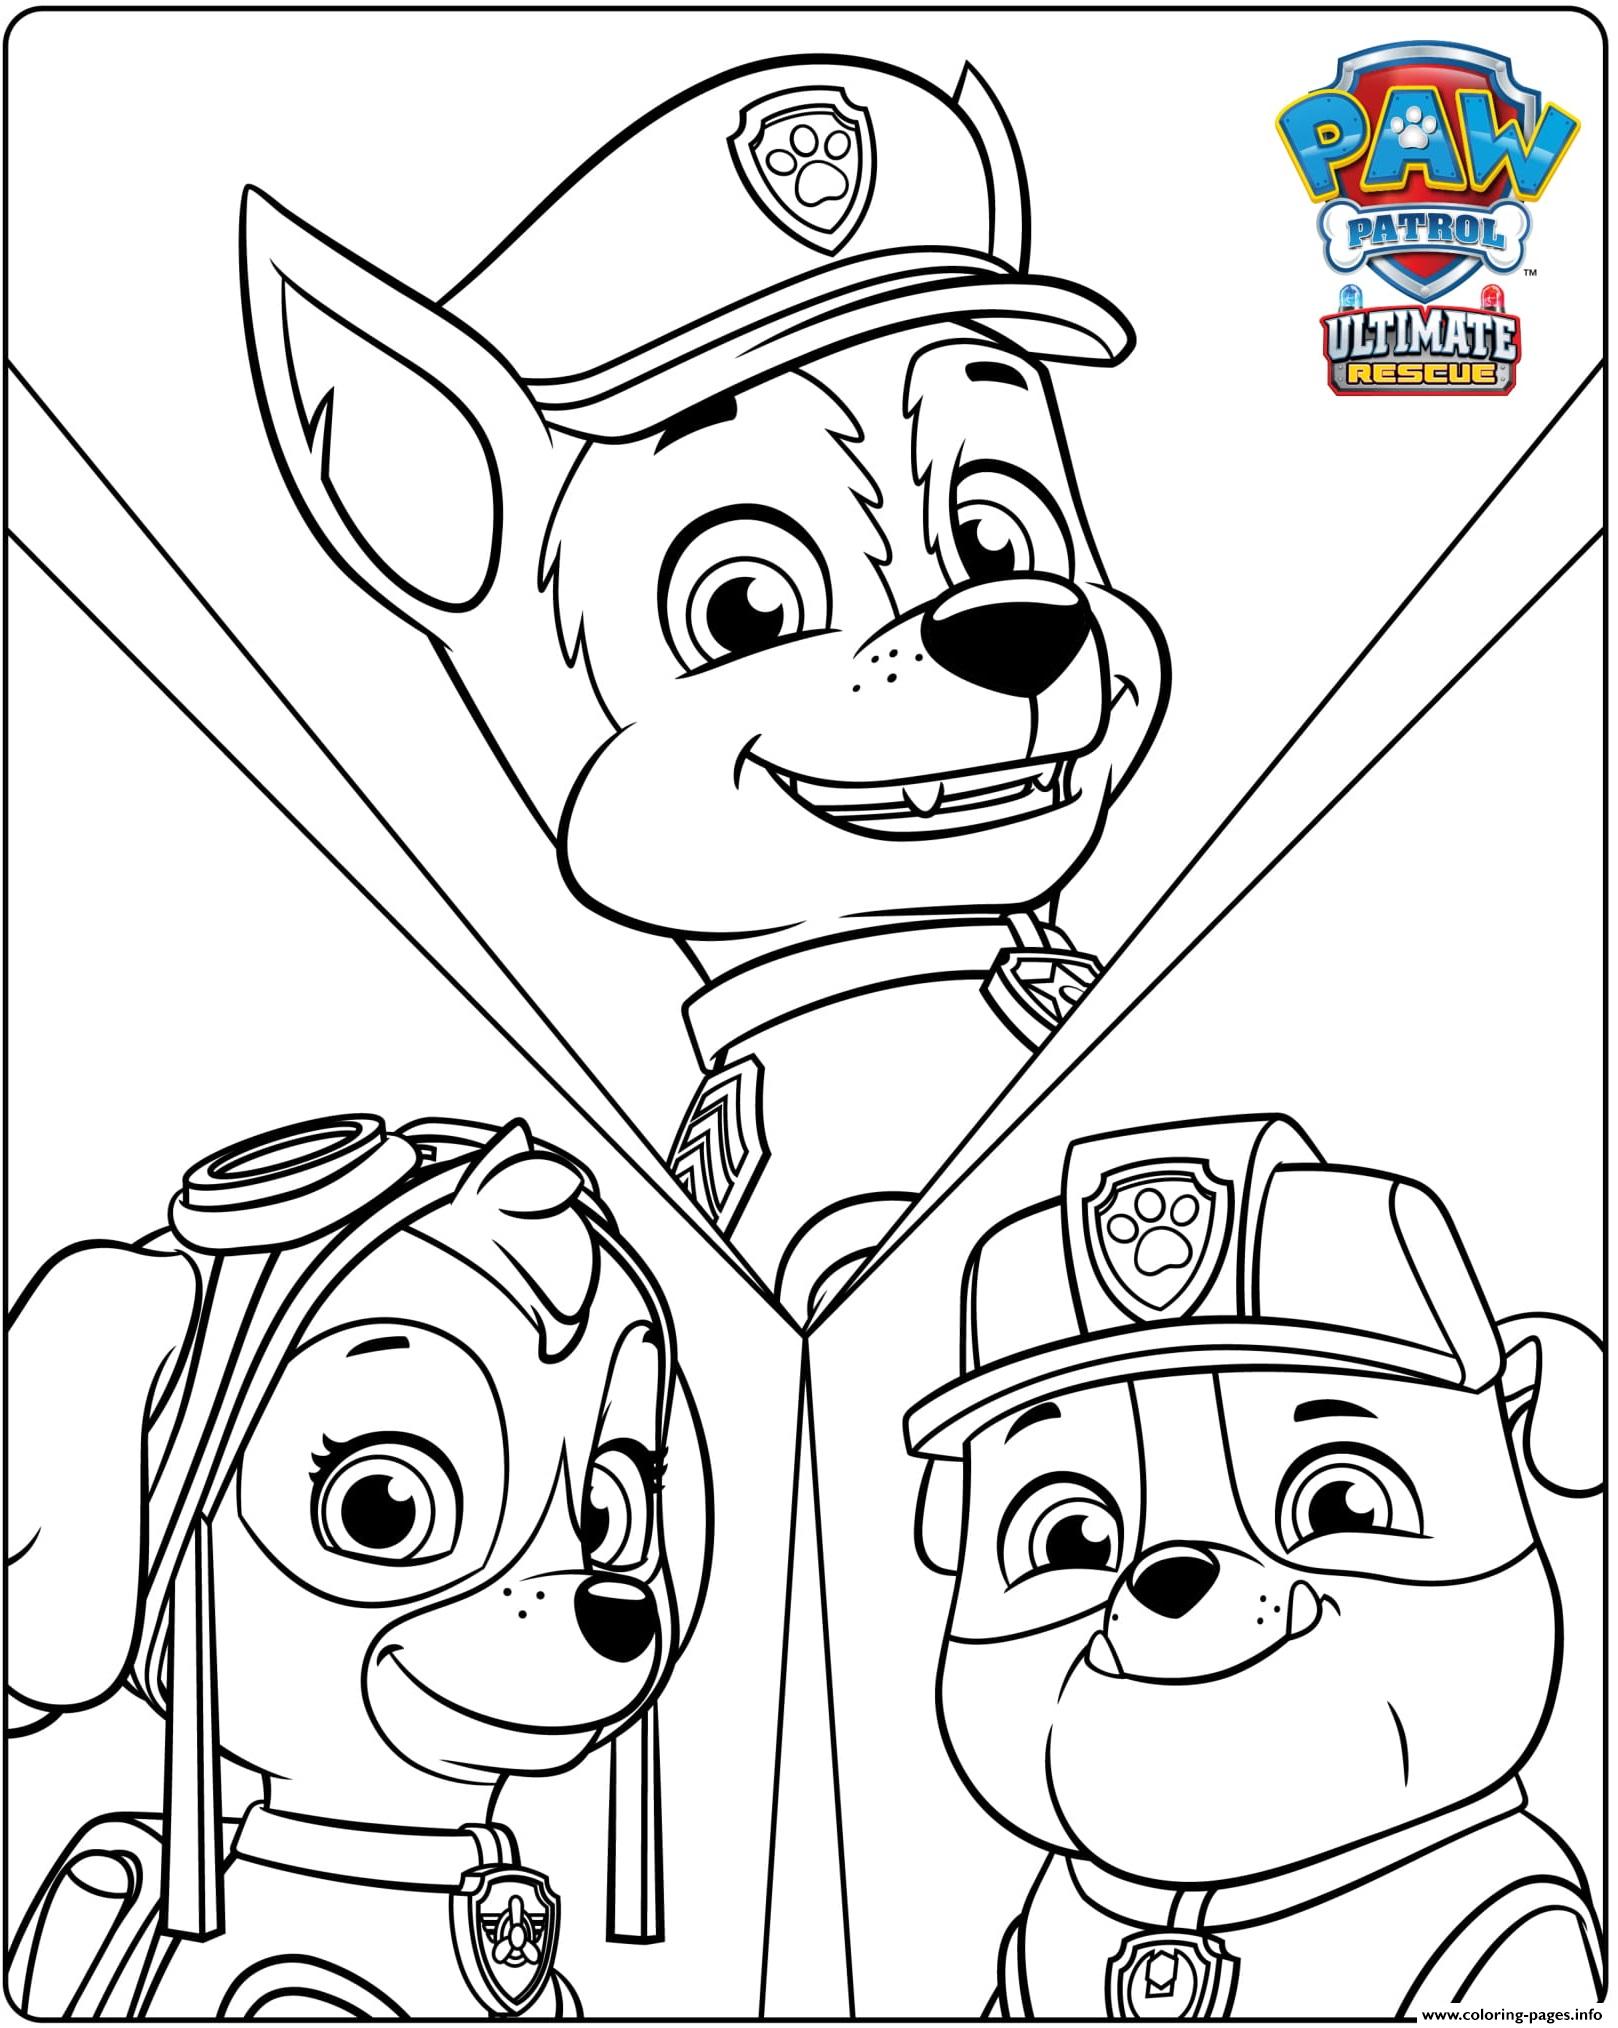 Coloring : Pages Paw Patrol Ultimate For Kids Printable Activity Sheets  Skye Halloween Pictures Book Pics To Color Drawing Colouring Free Images 59  Splendi Print Ww Hotmail Inbox ~ Americangrassrootscoalition